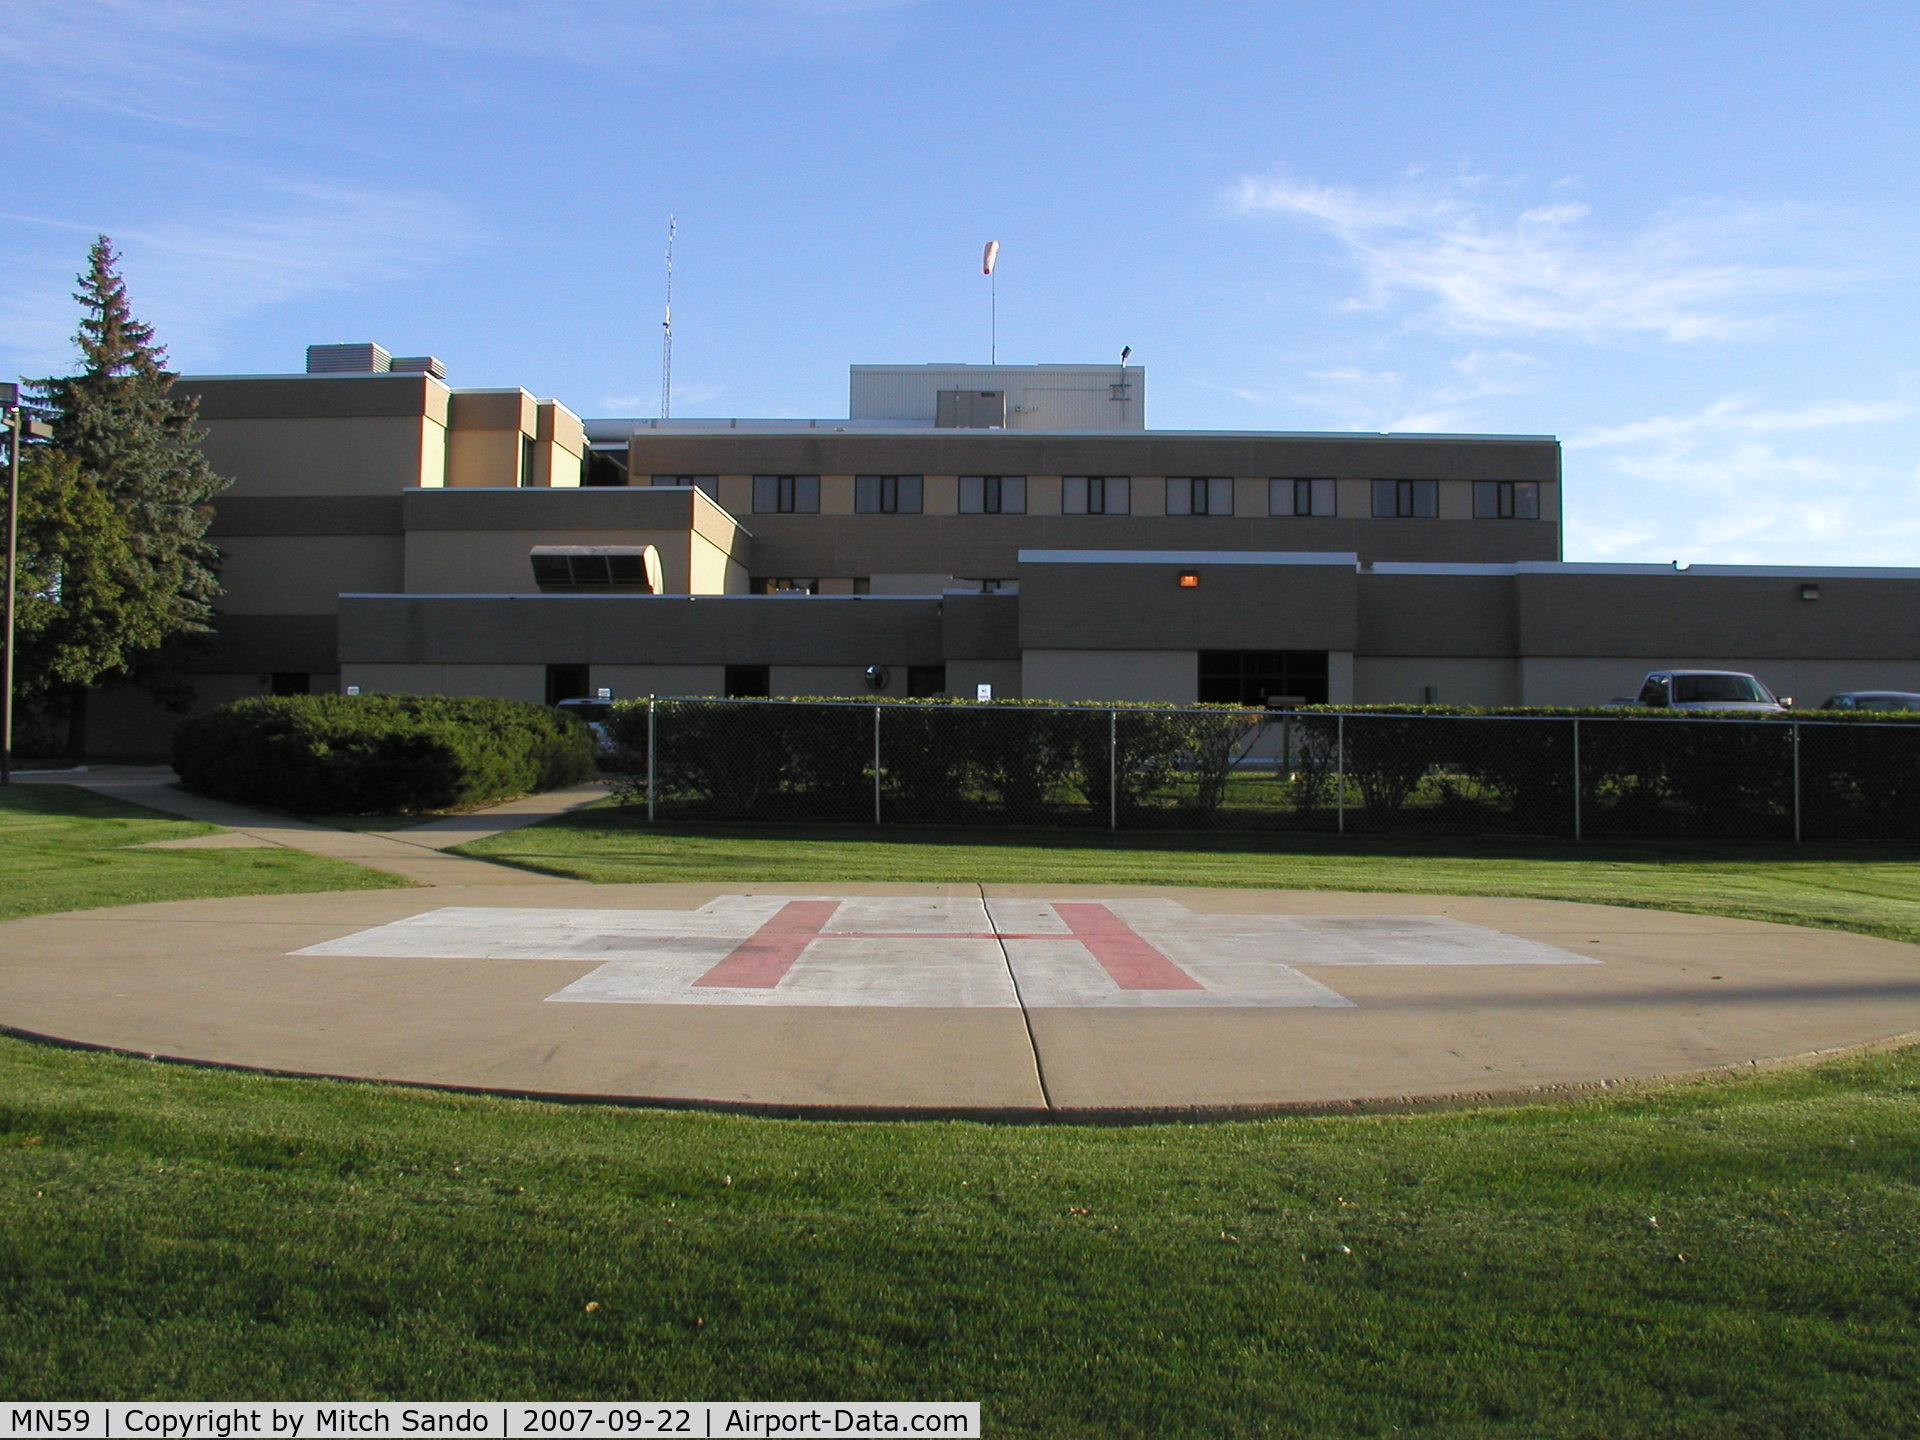 District One Hospital Heliport (MN59) - District One Hospital in Faribault, MN.